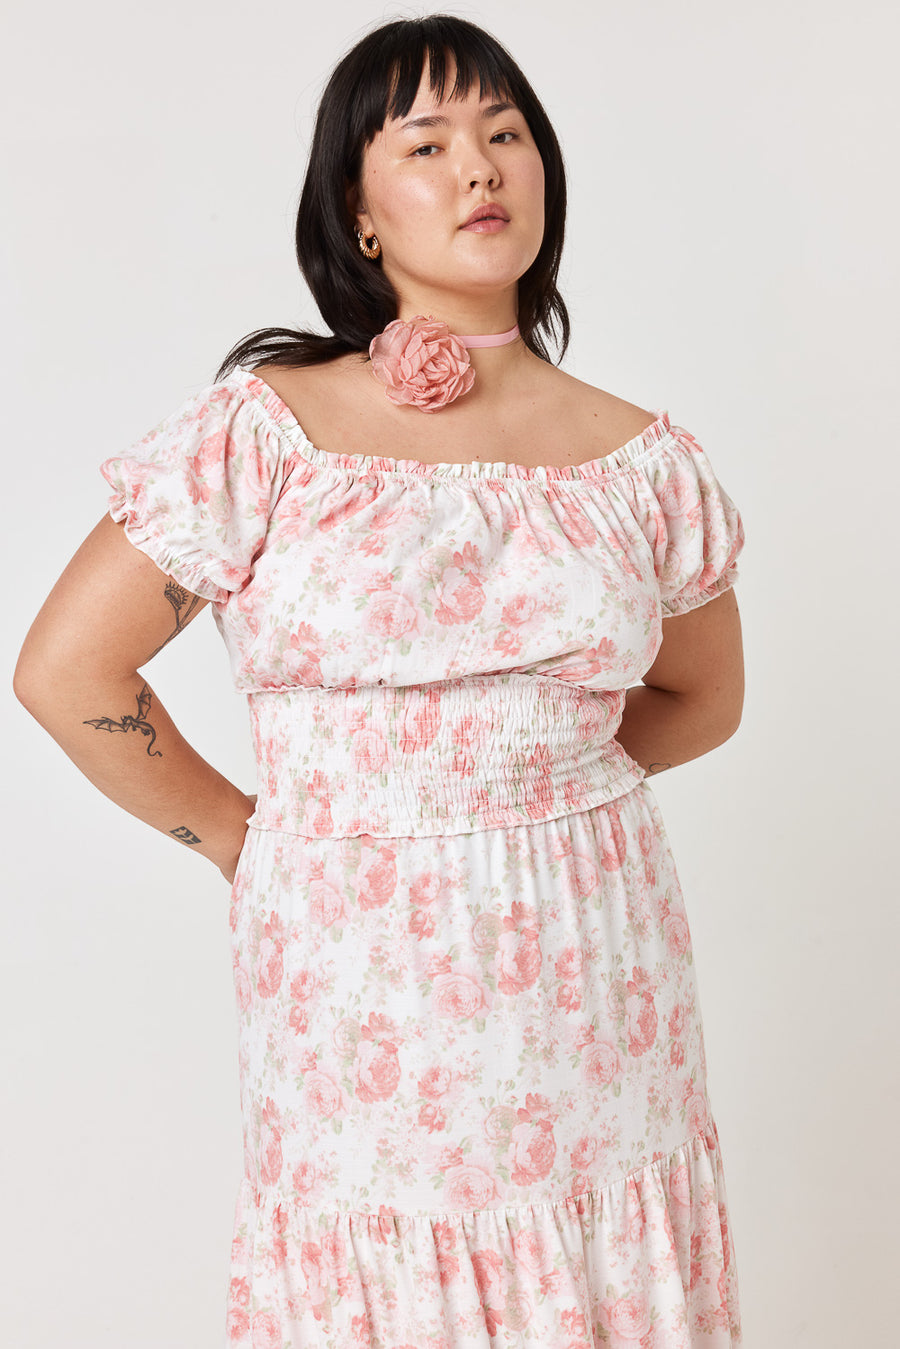 White Pink Floral Off The Shoulder Midi Dress - Trixxi Clothing